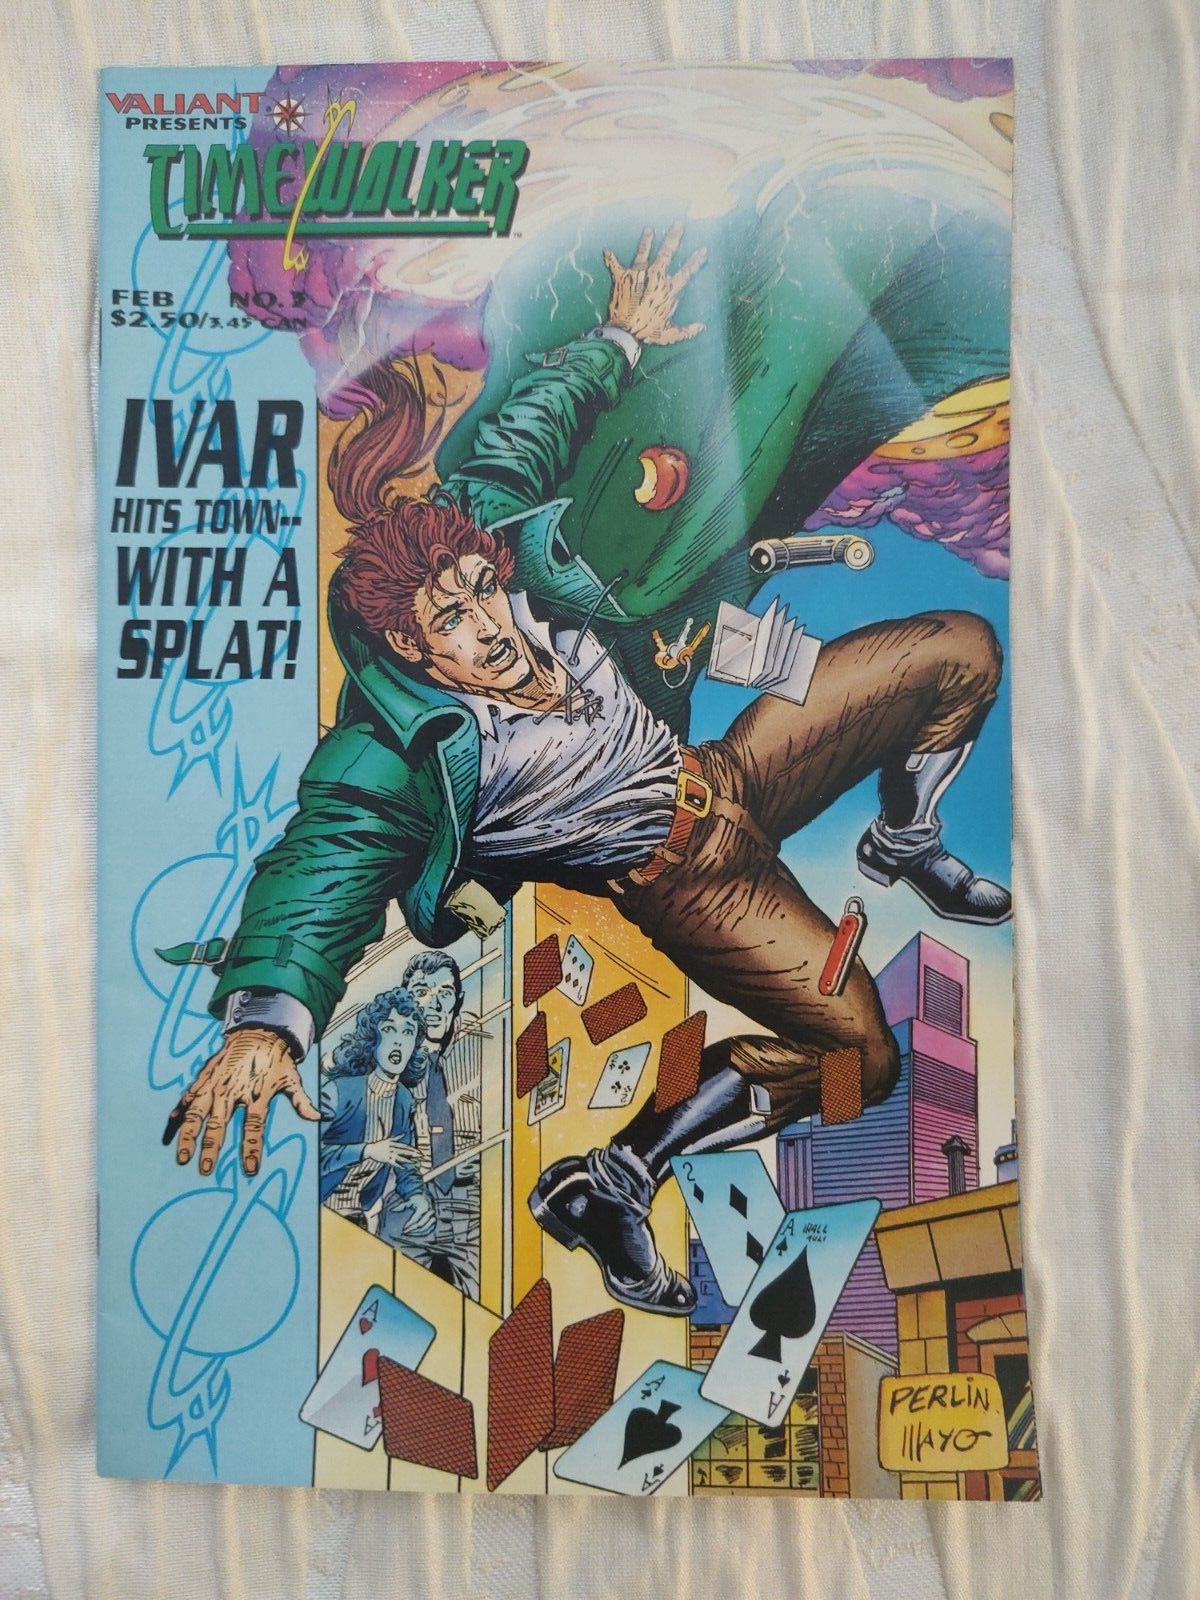 Cb42~comic book~rare time walker ivar hits town with a splat issue No.3 Feb